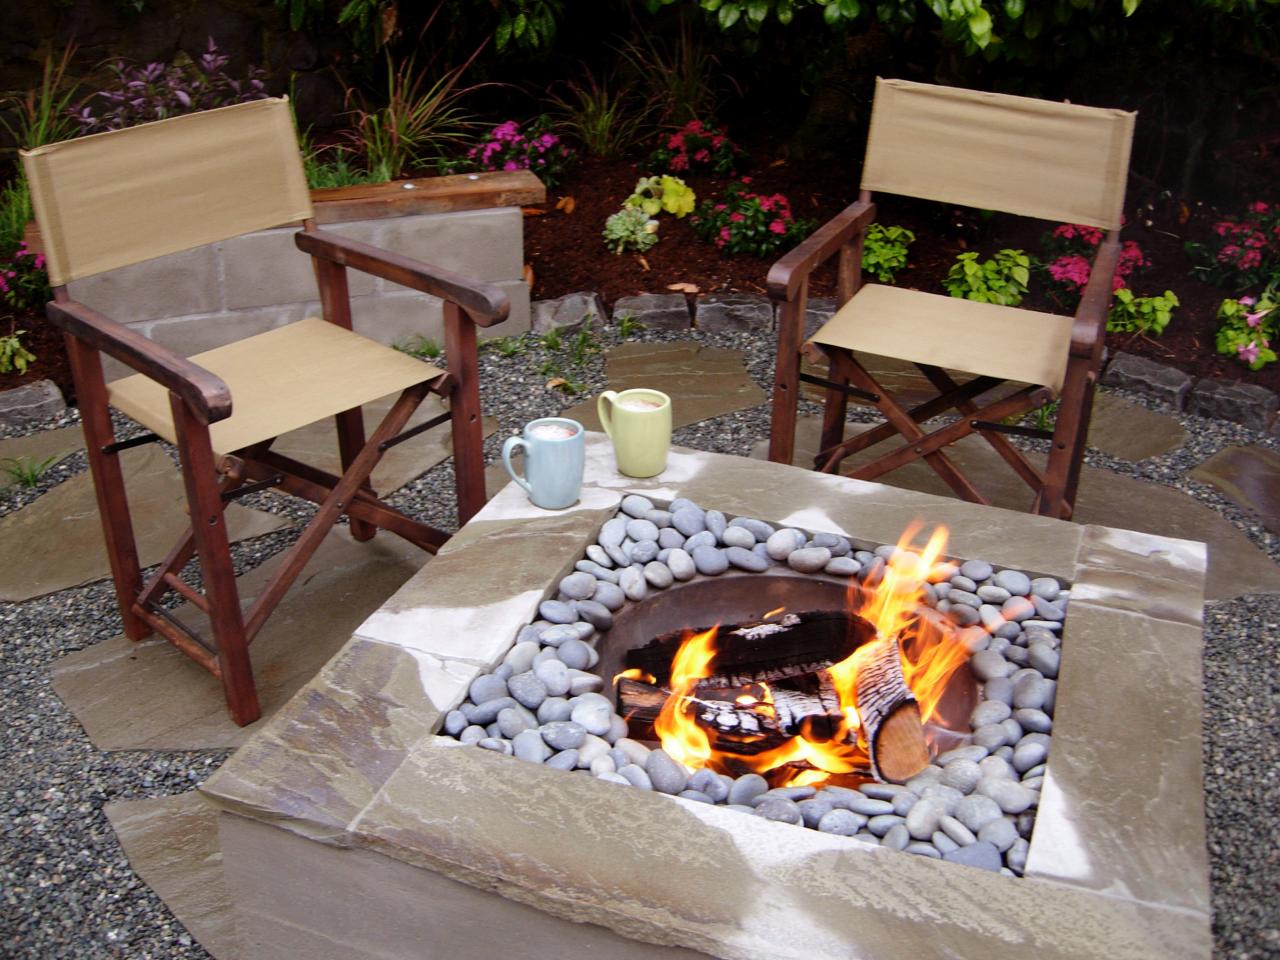 How To Make A Concrete Fire Feature Tos Diy - Can I Put A Fire Pit On My Concrete Patio